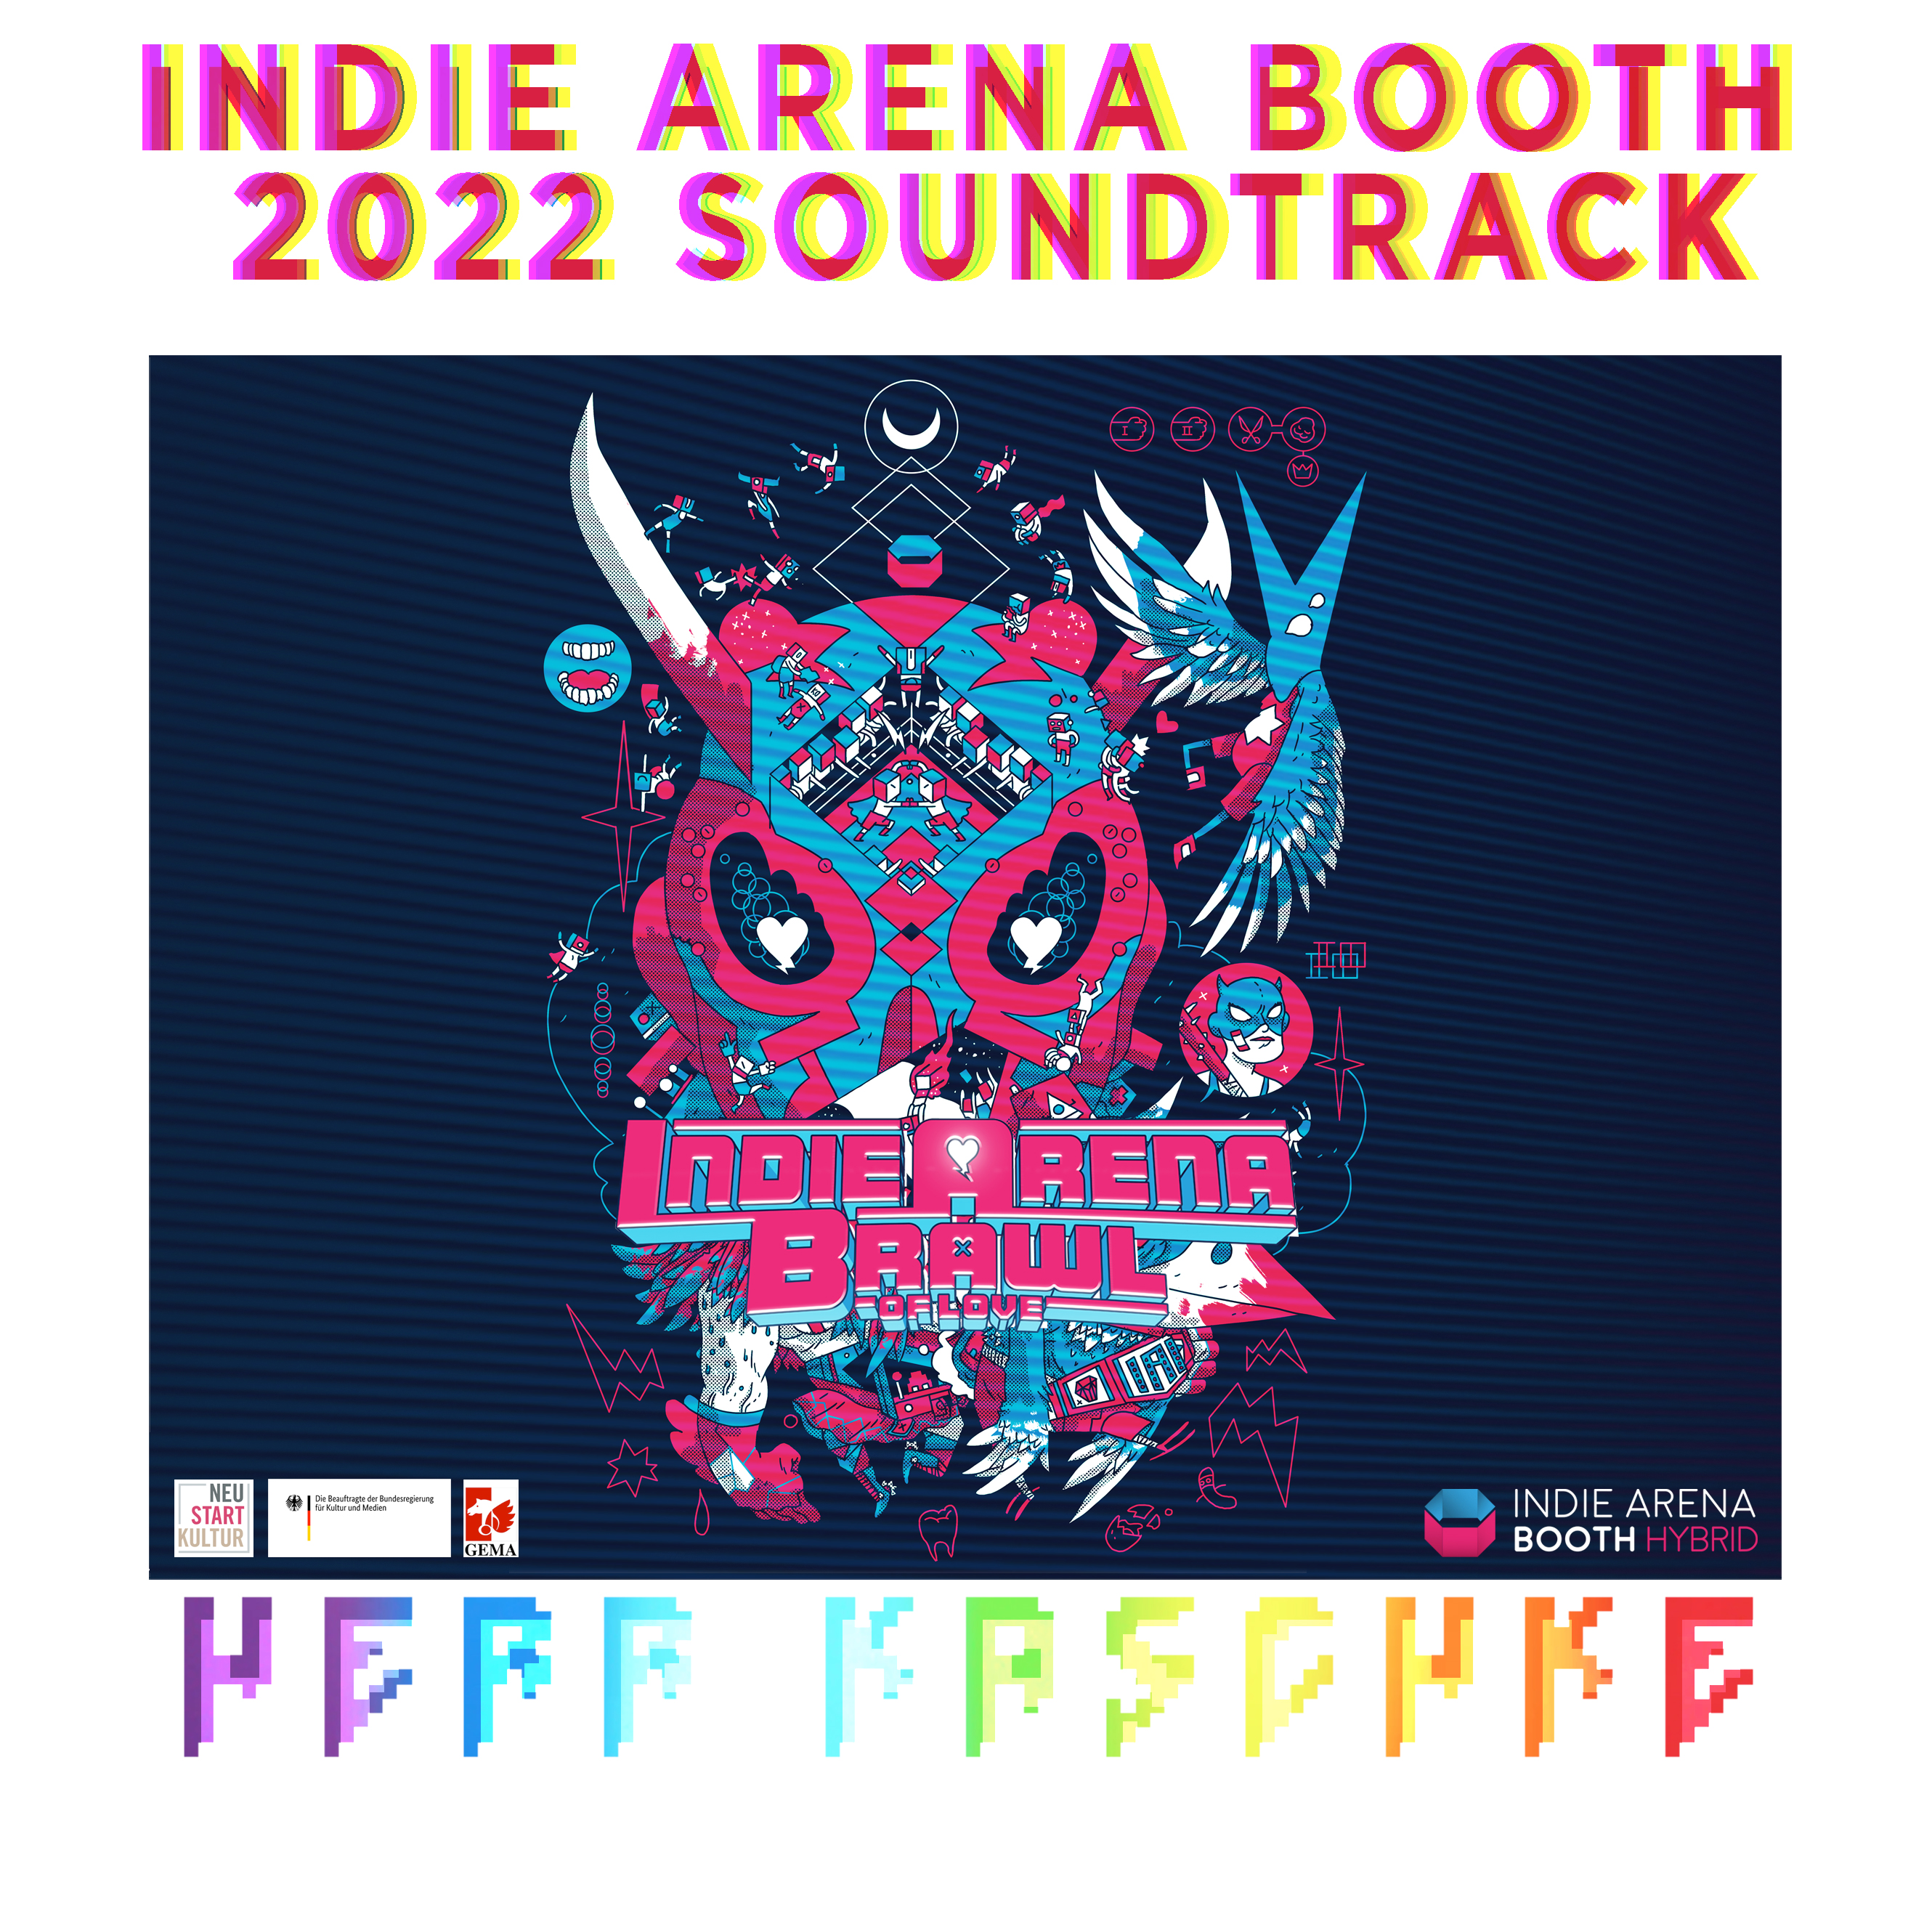 Indie Arena Booth 2022 Soundtrack